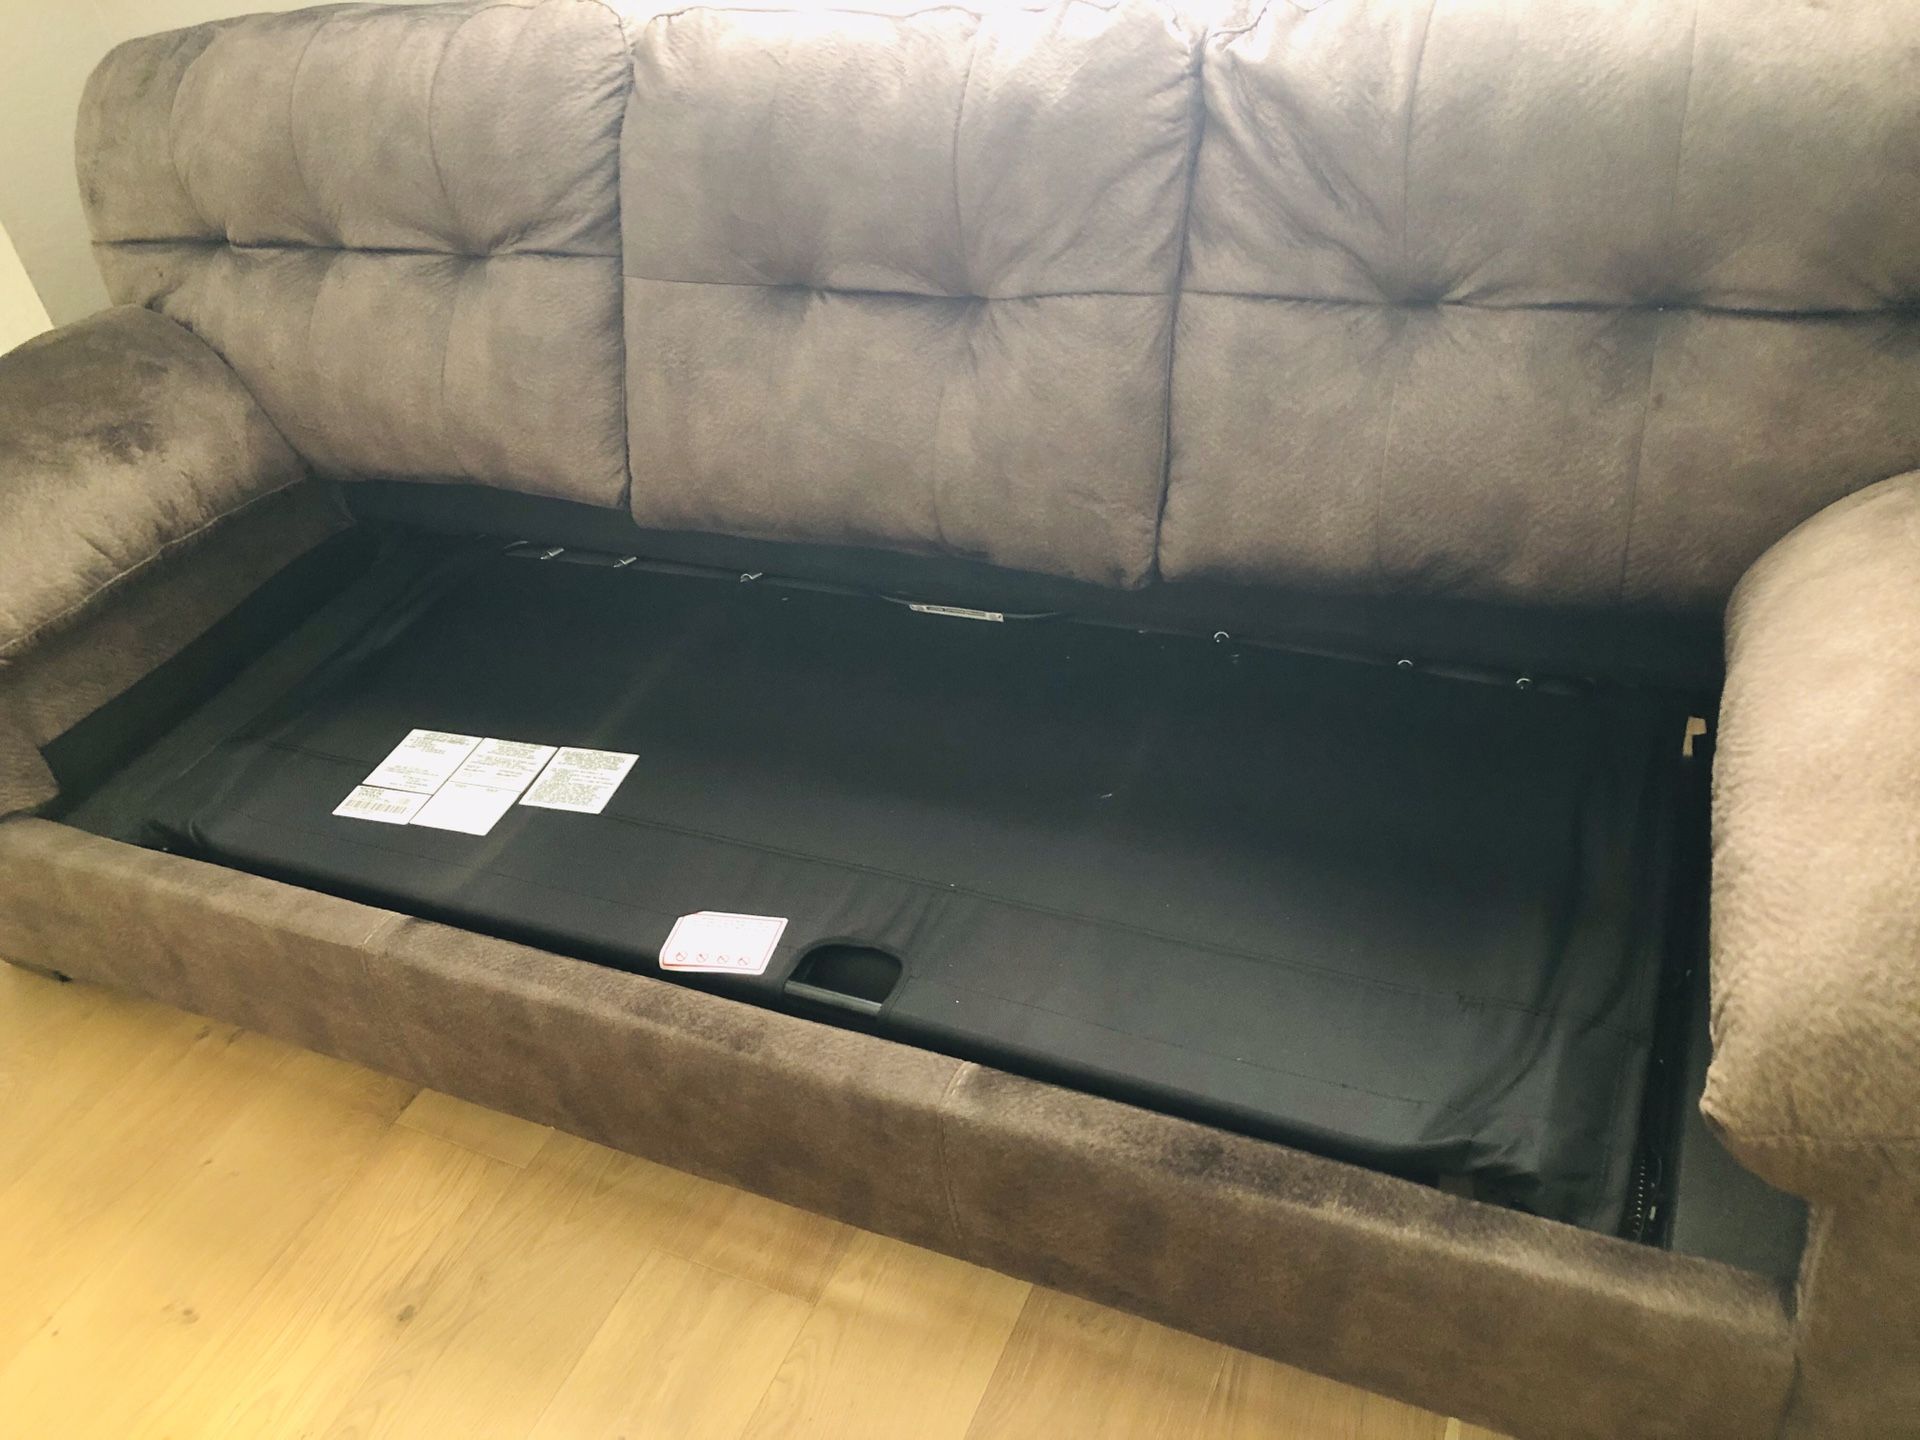 Sofa sleeper with four more years warranty. Moving sale ASAP!